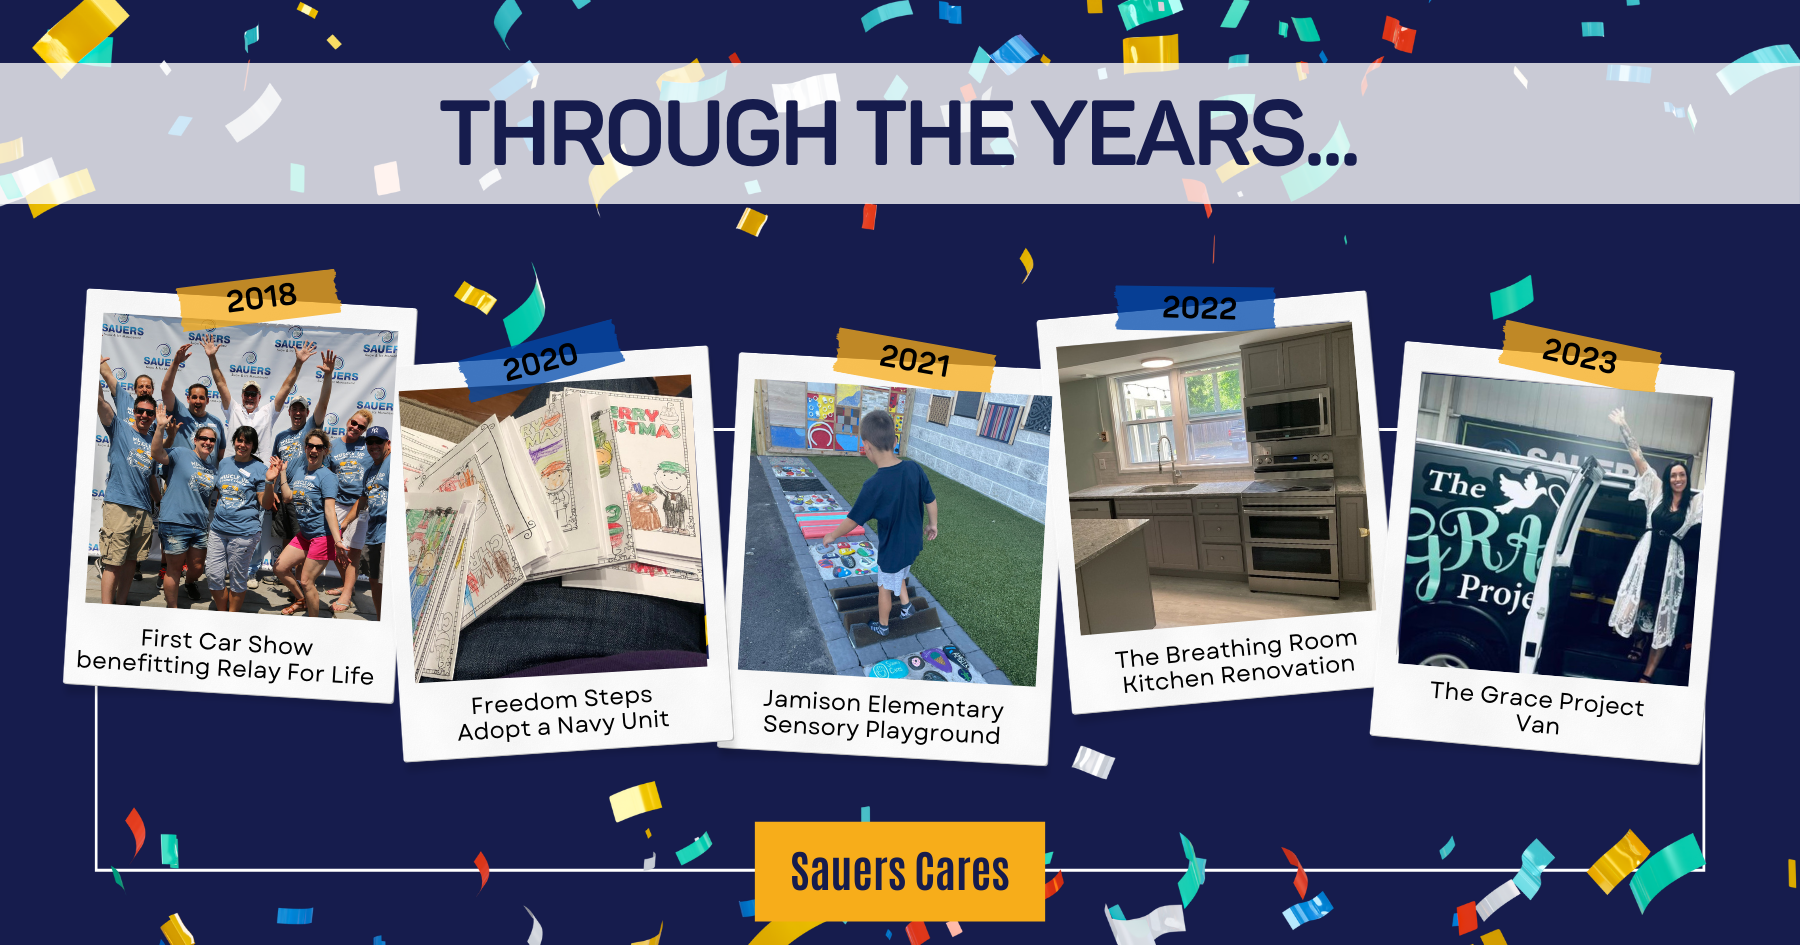 Through the years, Sauers Cares has successfully assisted more than 30 causes in Bucks and Montgomery counties.